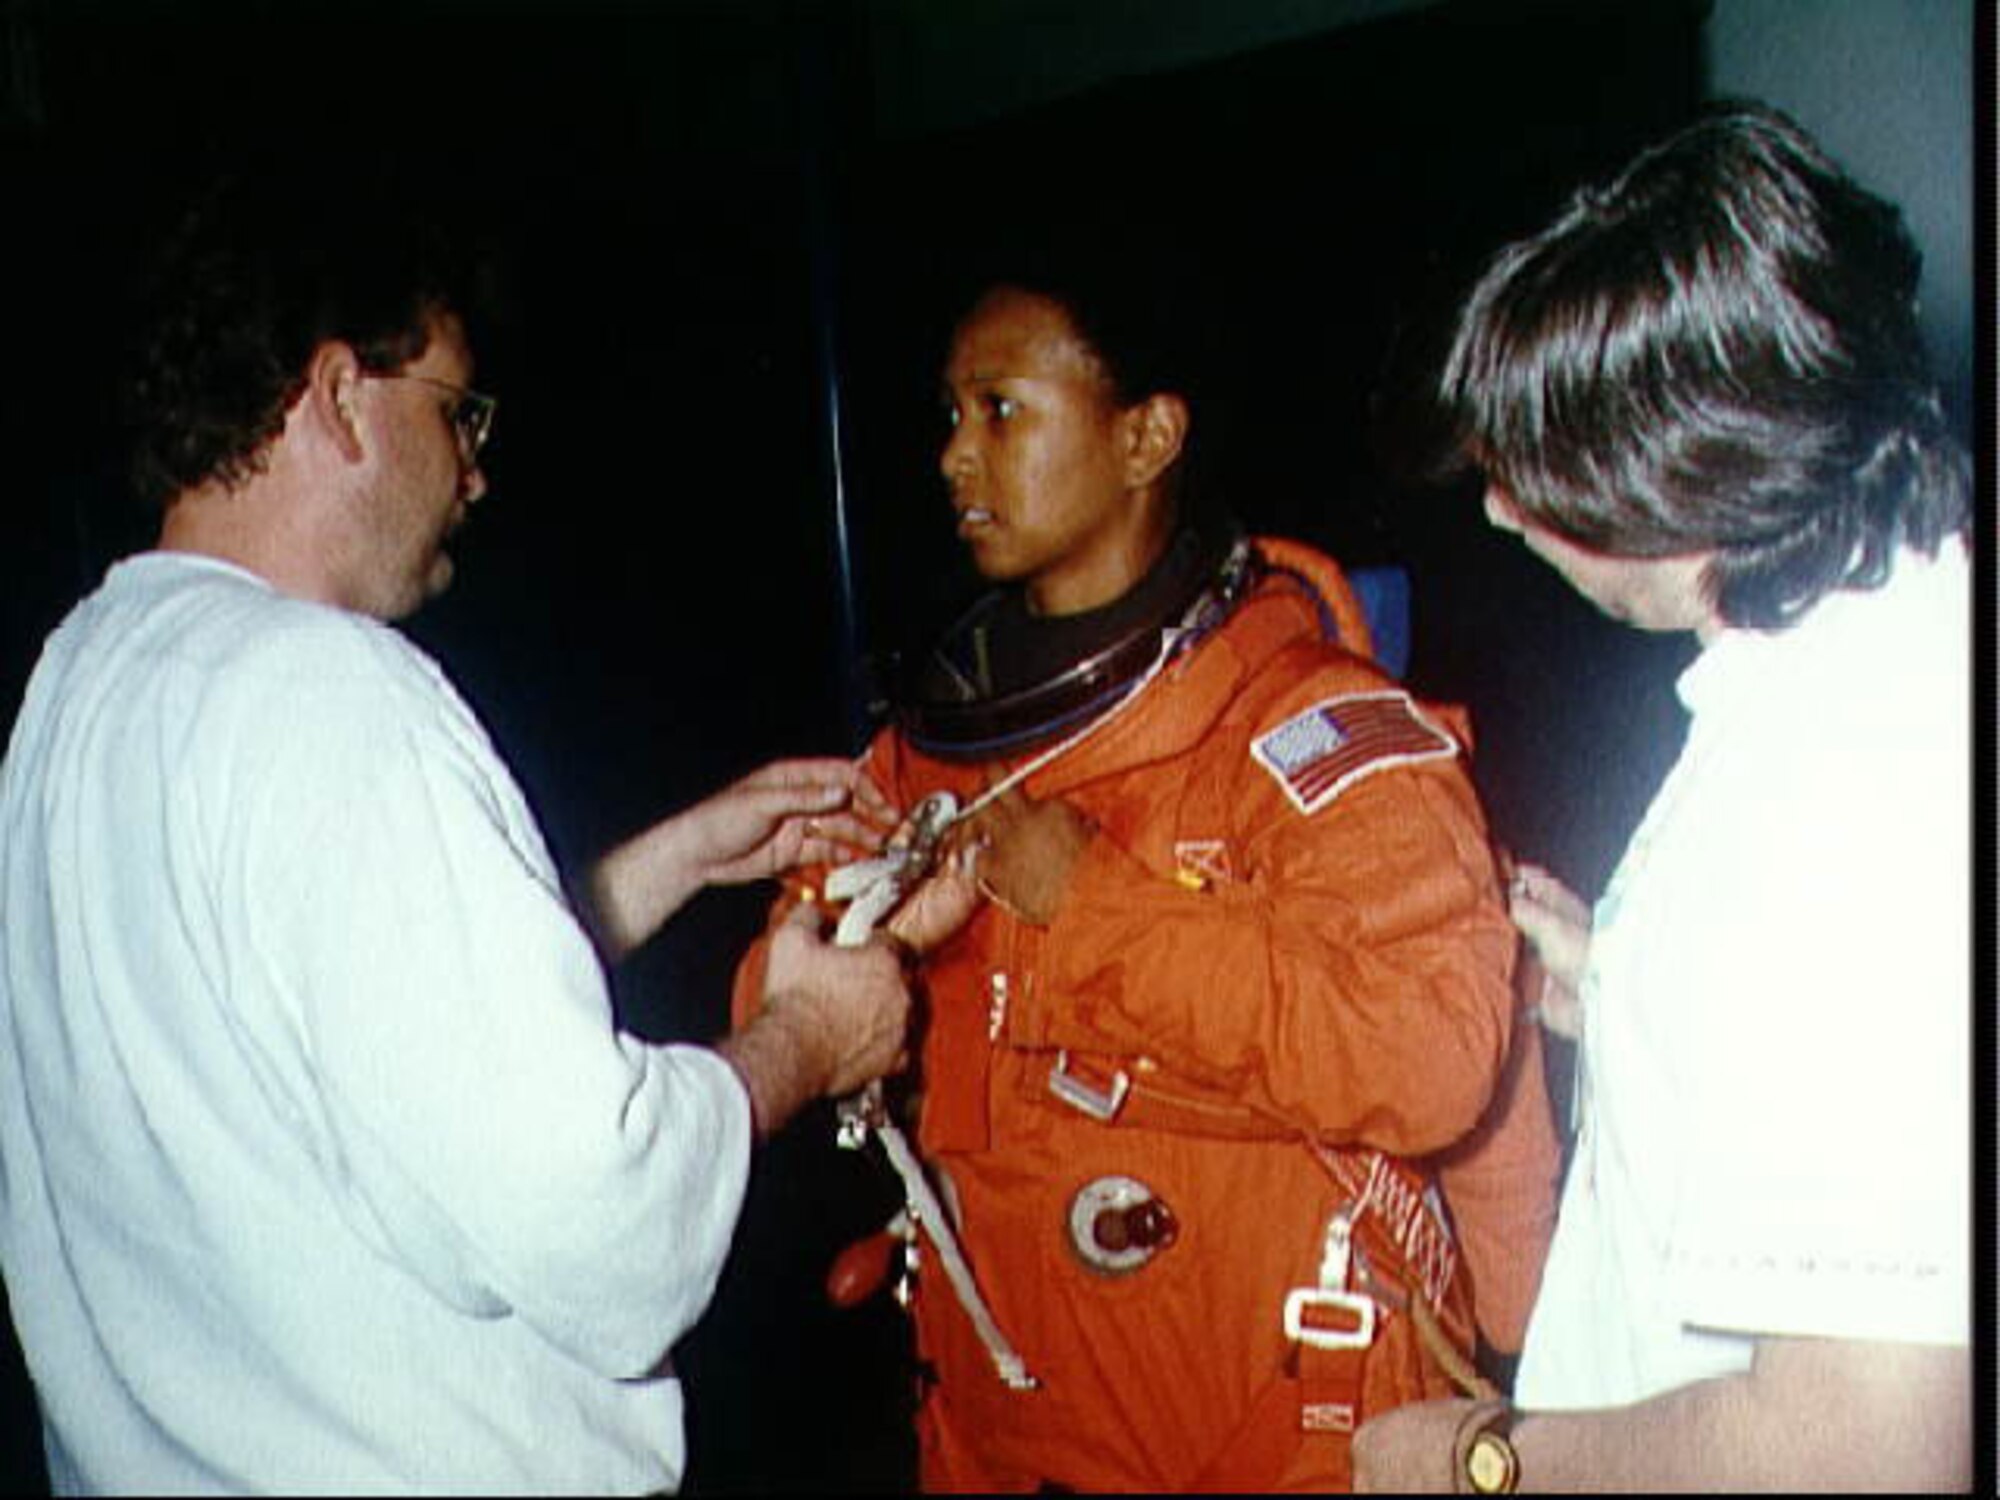 Dr. Mae Jemison was the first African-American woman in space